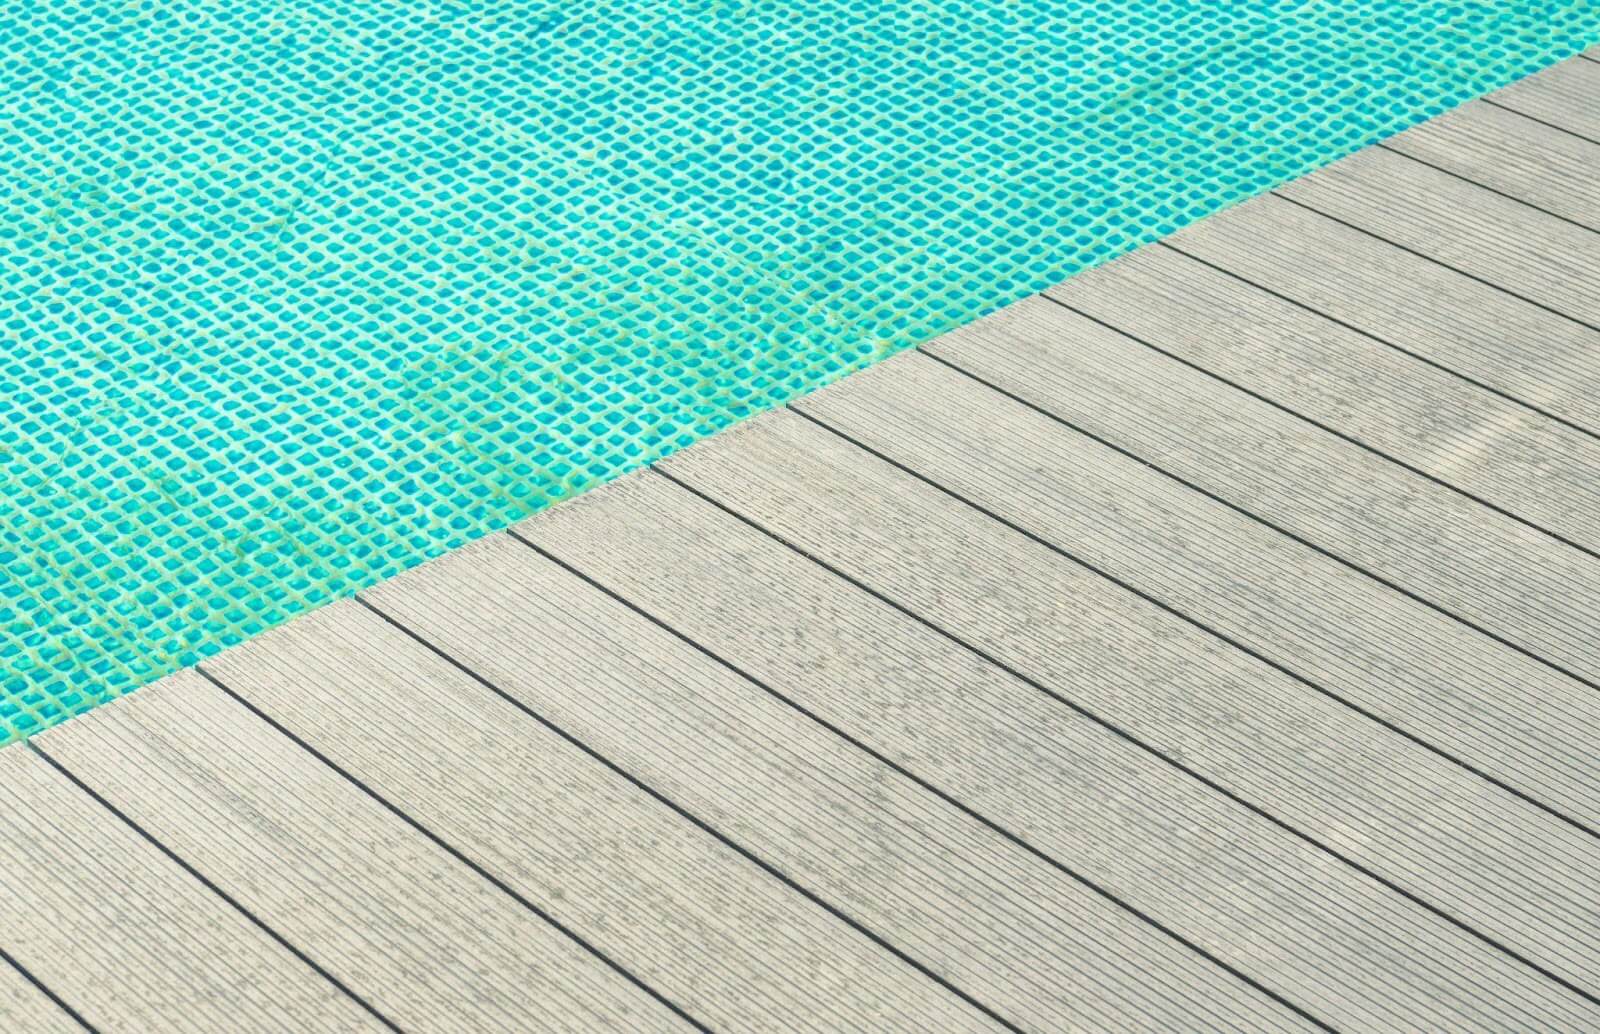 6 Common Misconceptions About Composite Decking Tulou - 6 Common Misconceptions About Composite Decking